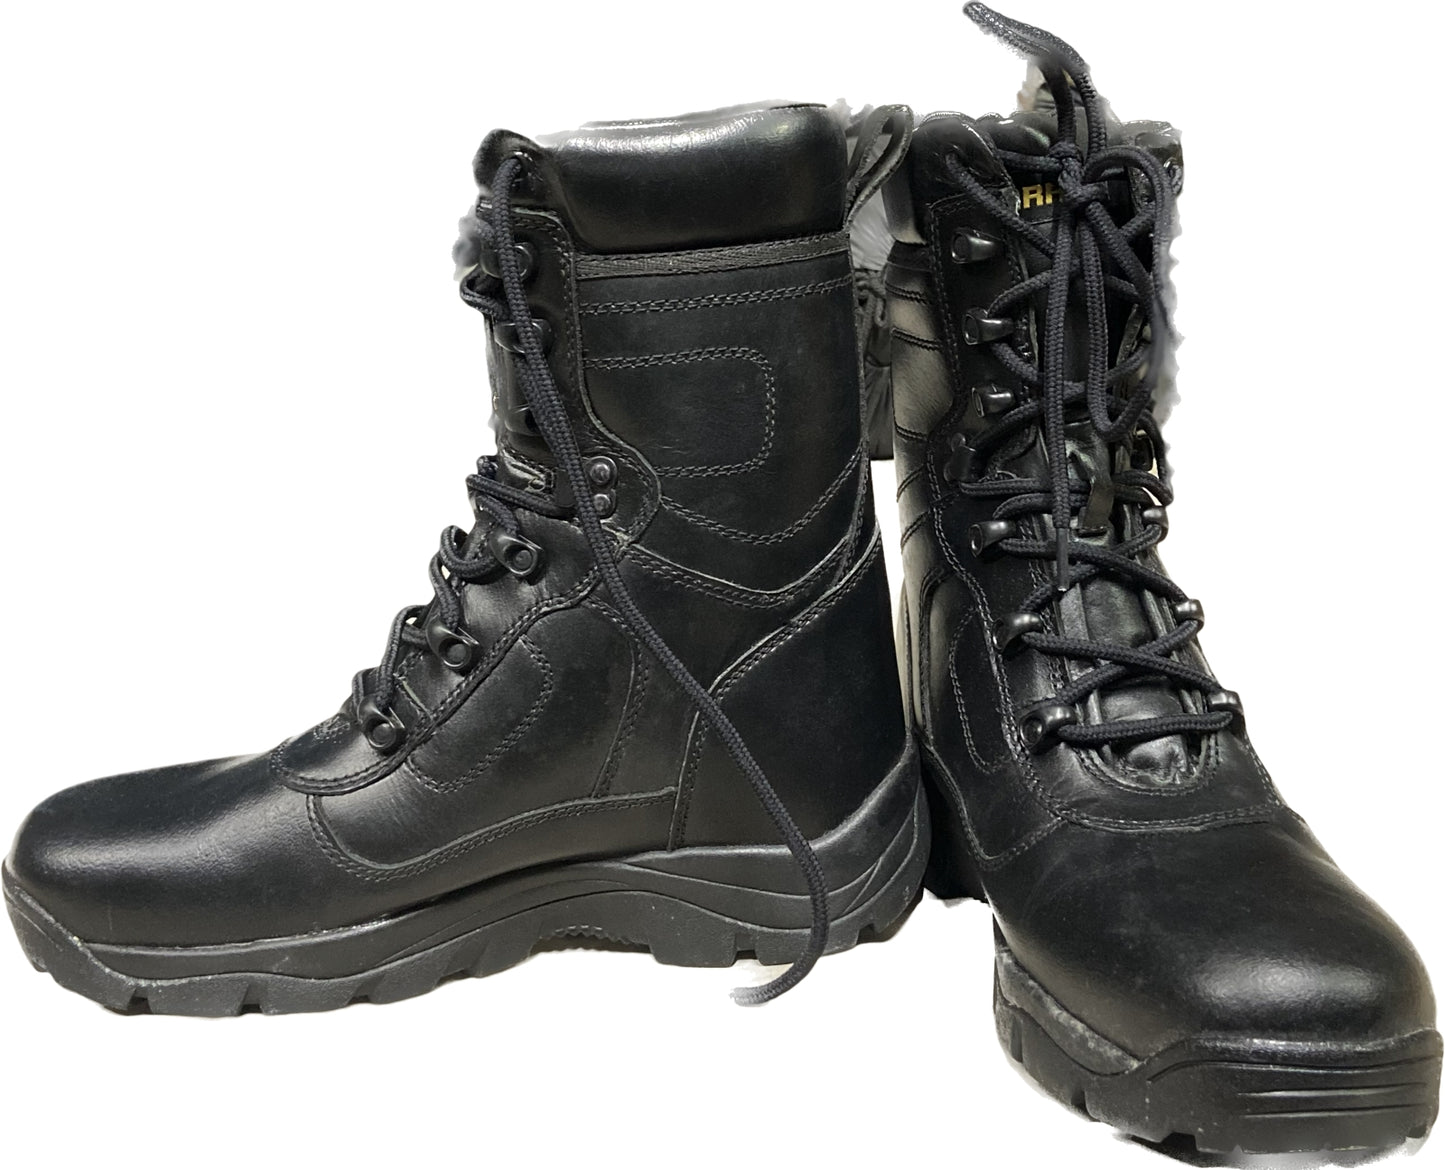 Liberty Warrior DMS Boot (Original Army ISSUE)